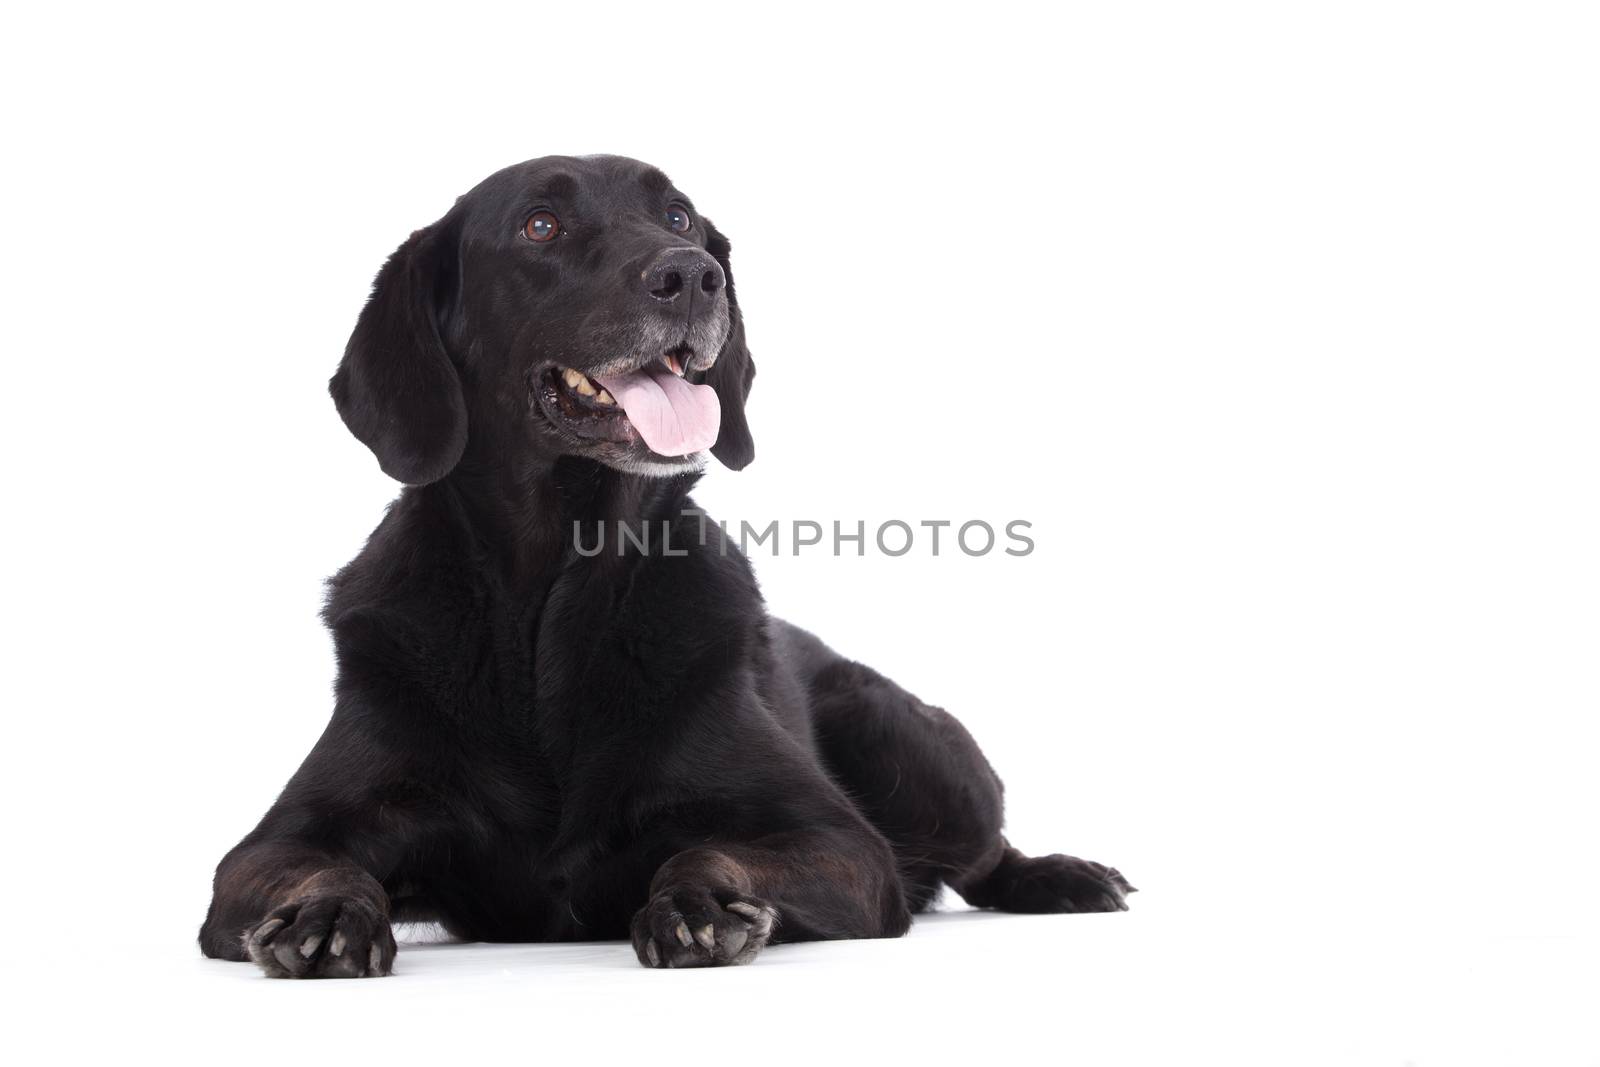 Obedienced labrador by DNFStyle